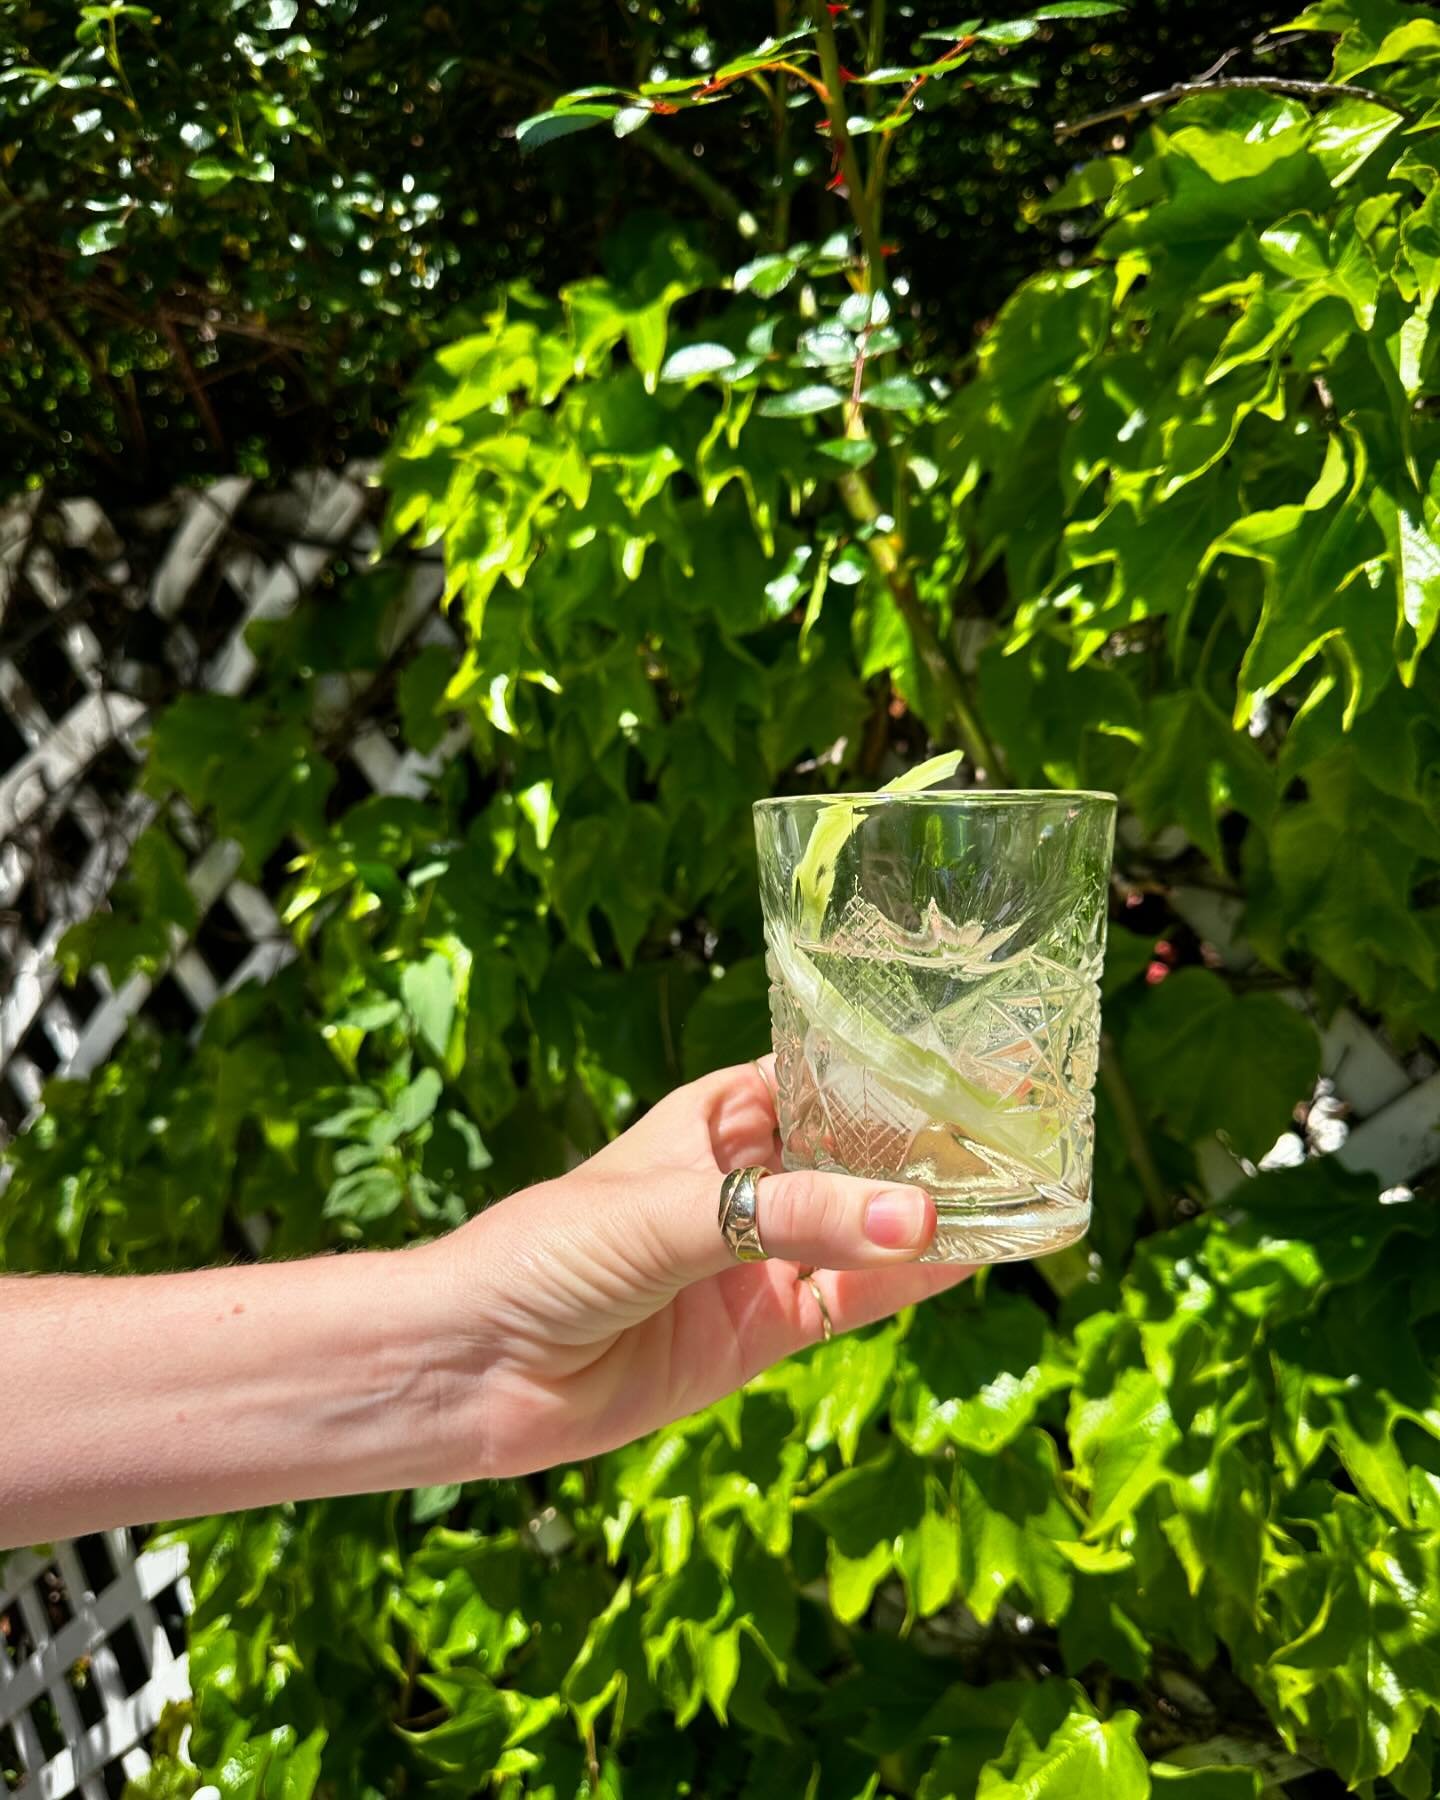 Lush back garden vibes 🌱

In hand is the Good Will Hunting. Poured with Gin, @massenez_officiel Pomme Verte, Tximista Blanc Vermouth, and Celery Bitters.